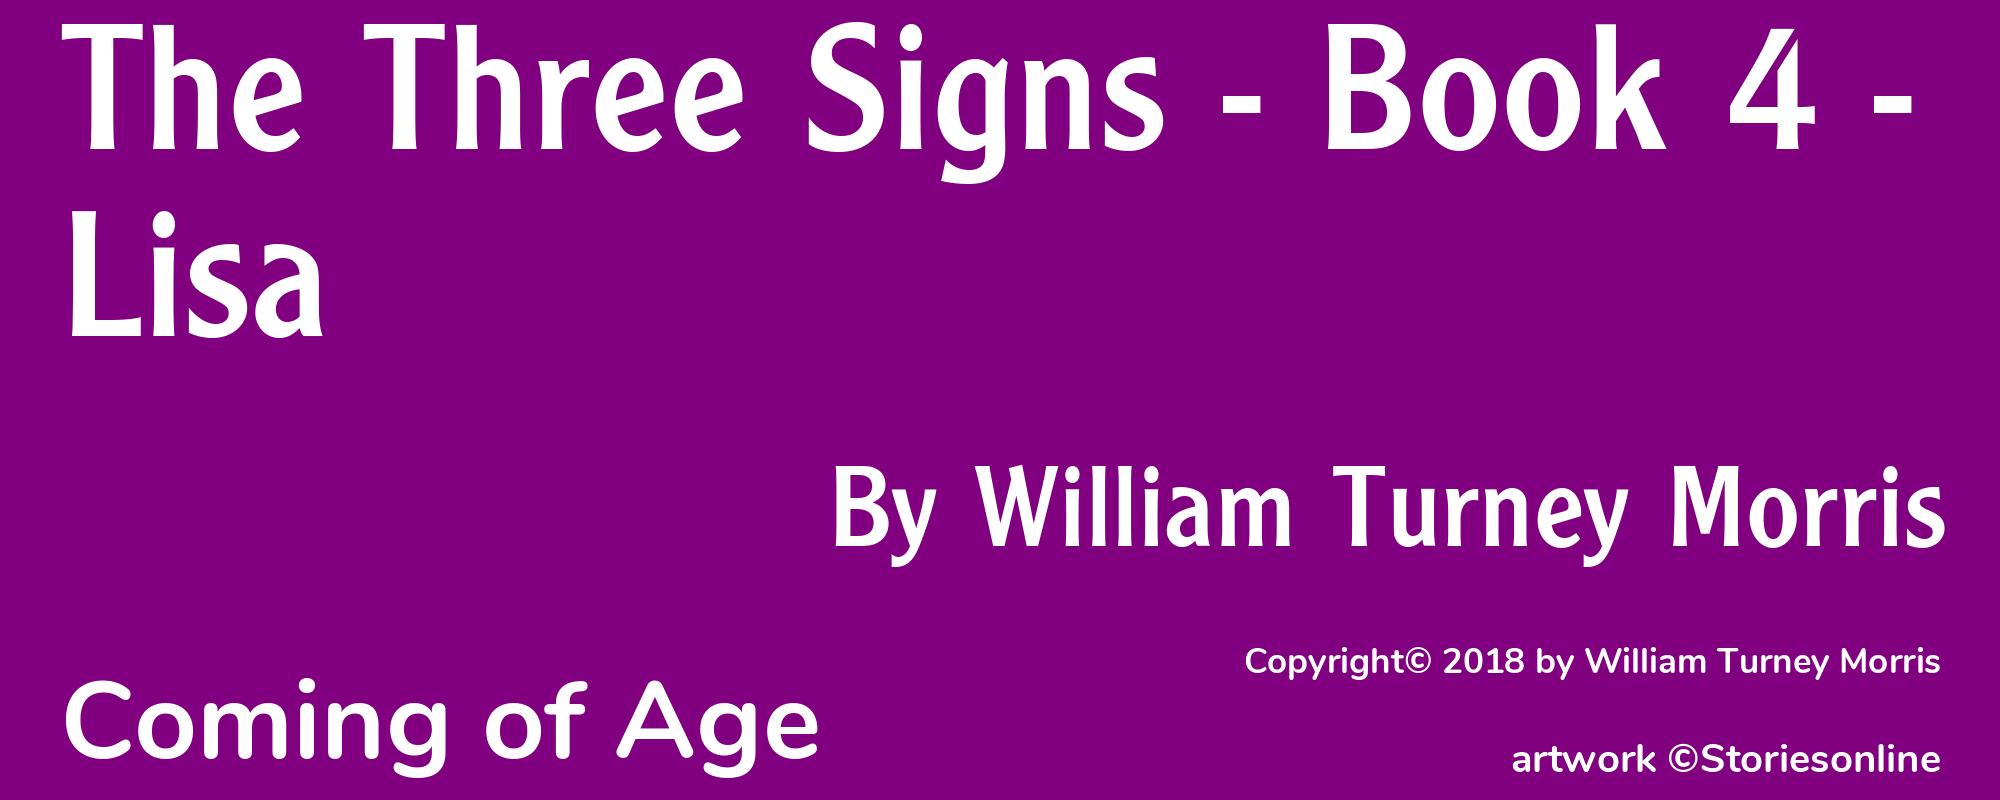 The Three Signs - Book 4 - Lisa - Cover